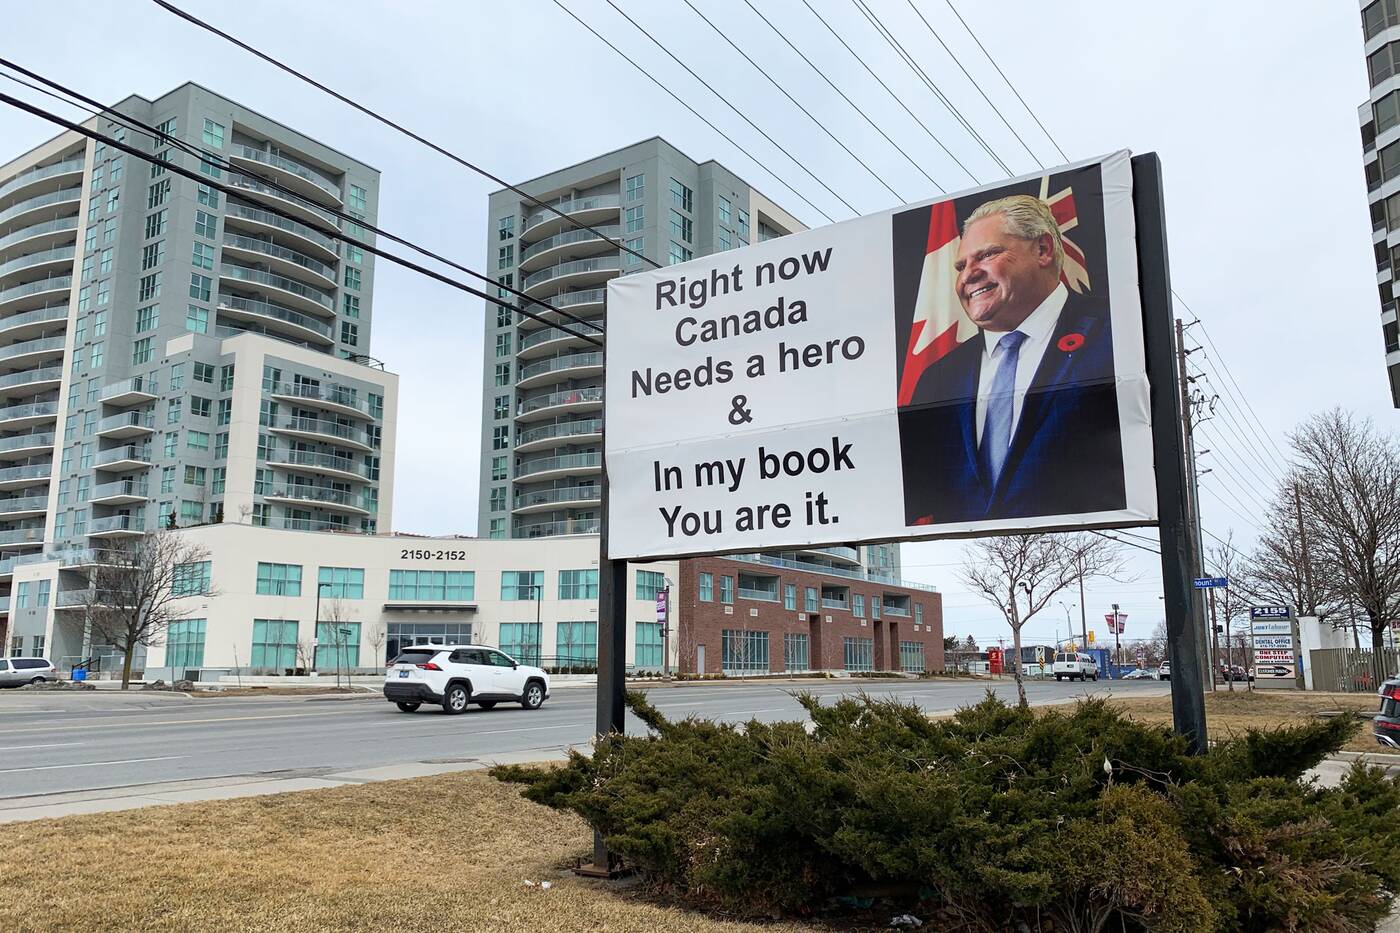 Someone is photoshopping this Doug Ford sign with other people's